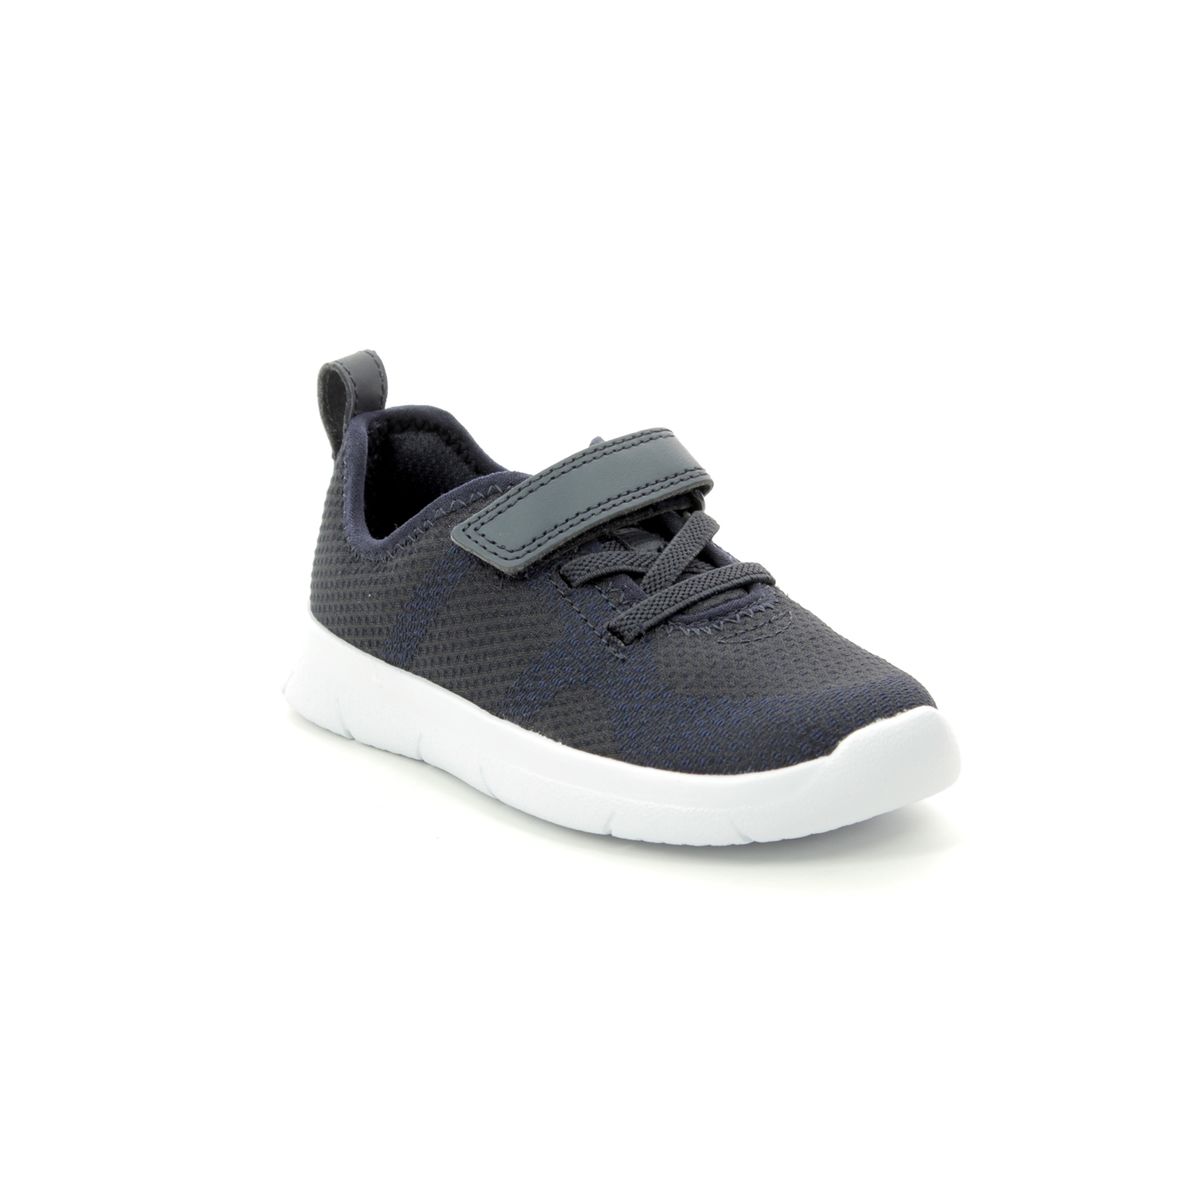 Clarks Ath Flux T Navy Kids Toddler Boys Trainers 412696F In Size 6.5 In Plain Navy F Width Fitting Regular Fit For kids